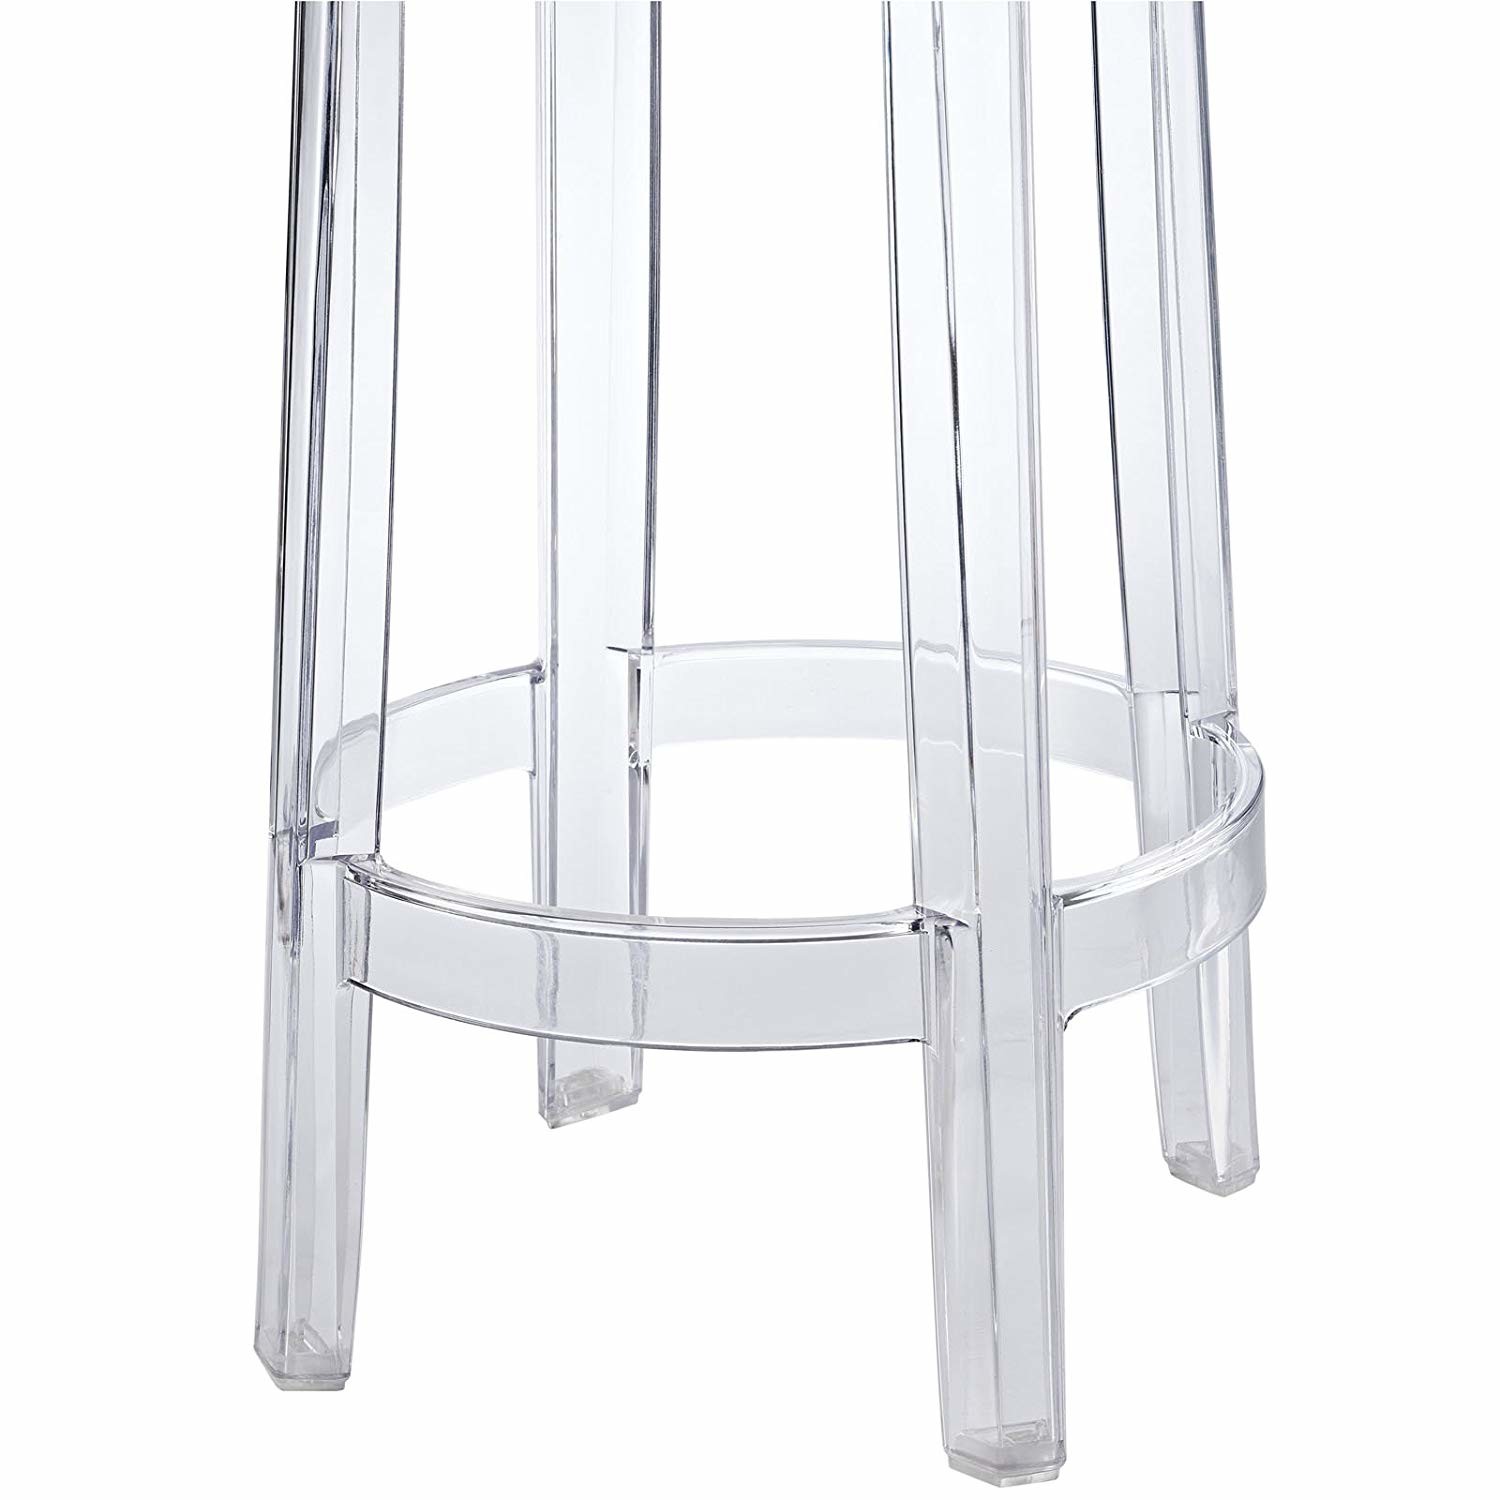 Quality ROHS Modern Clear Acrylic Counter Stool Chairs Fully Assembled For Backyard for sale